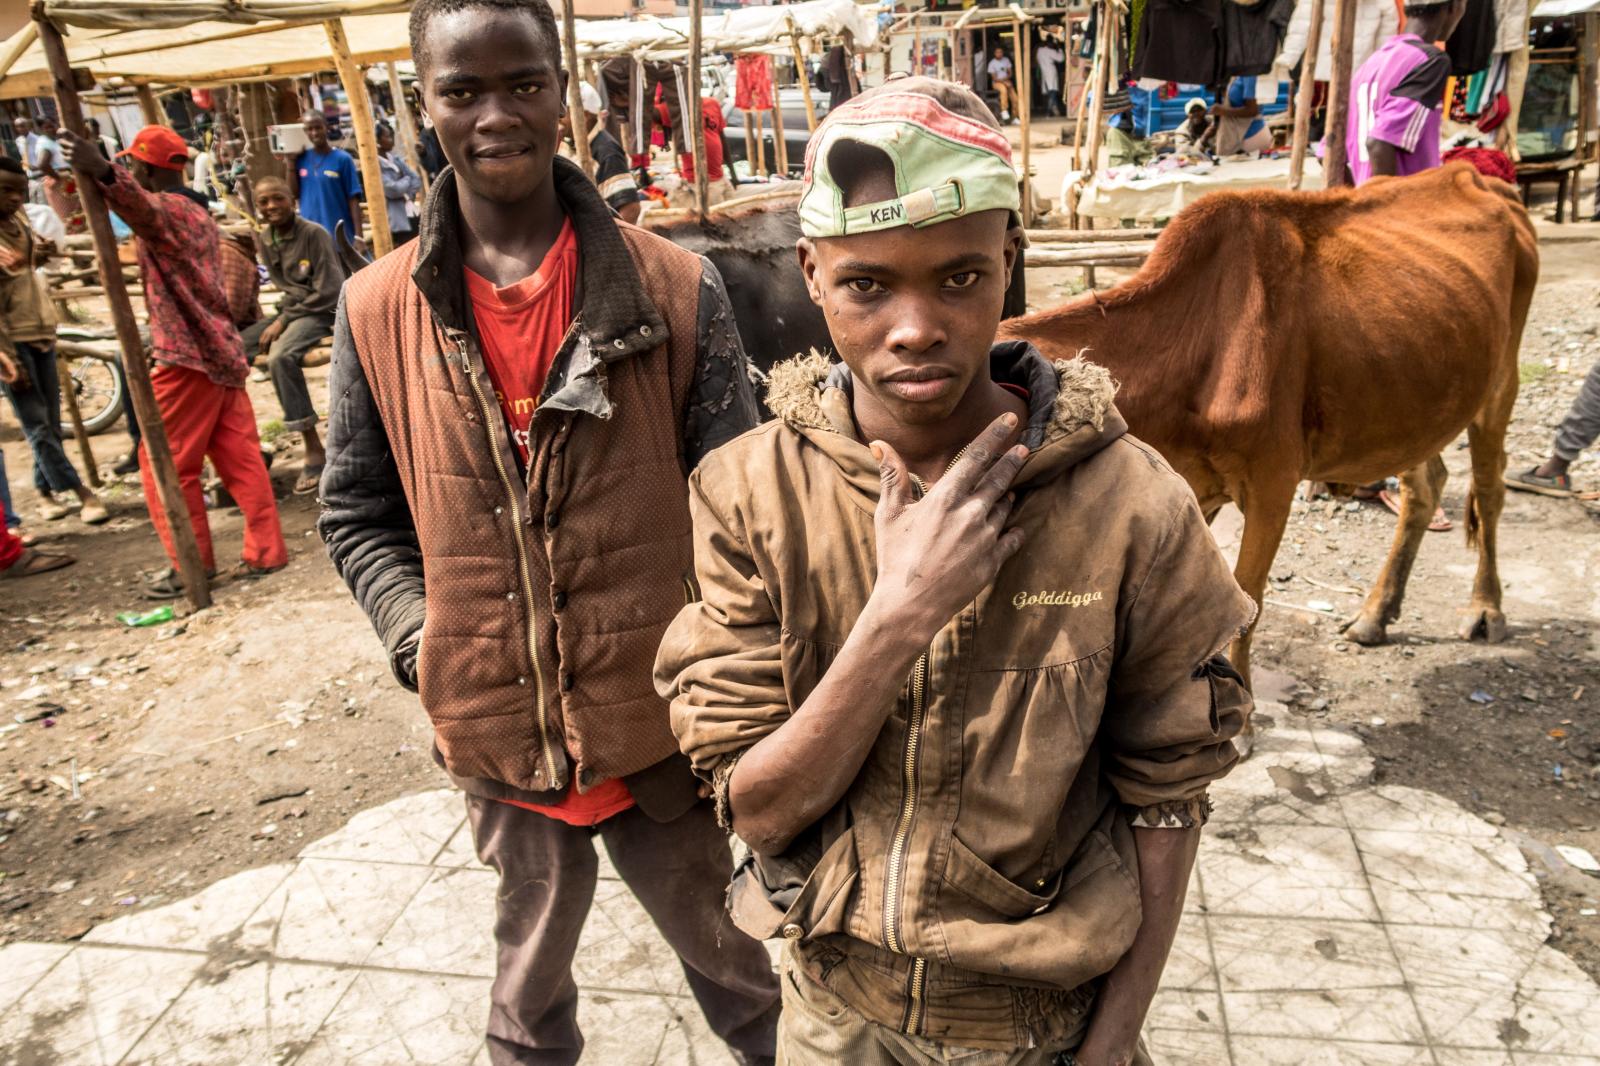 The glue staves off the hunger; street boys of Narok